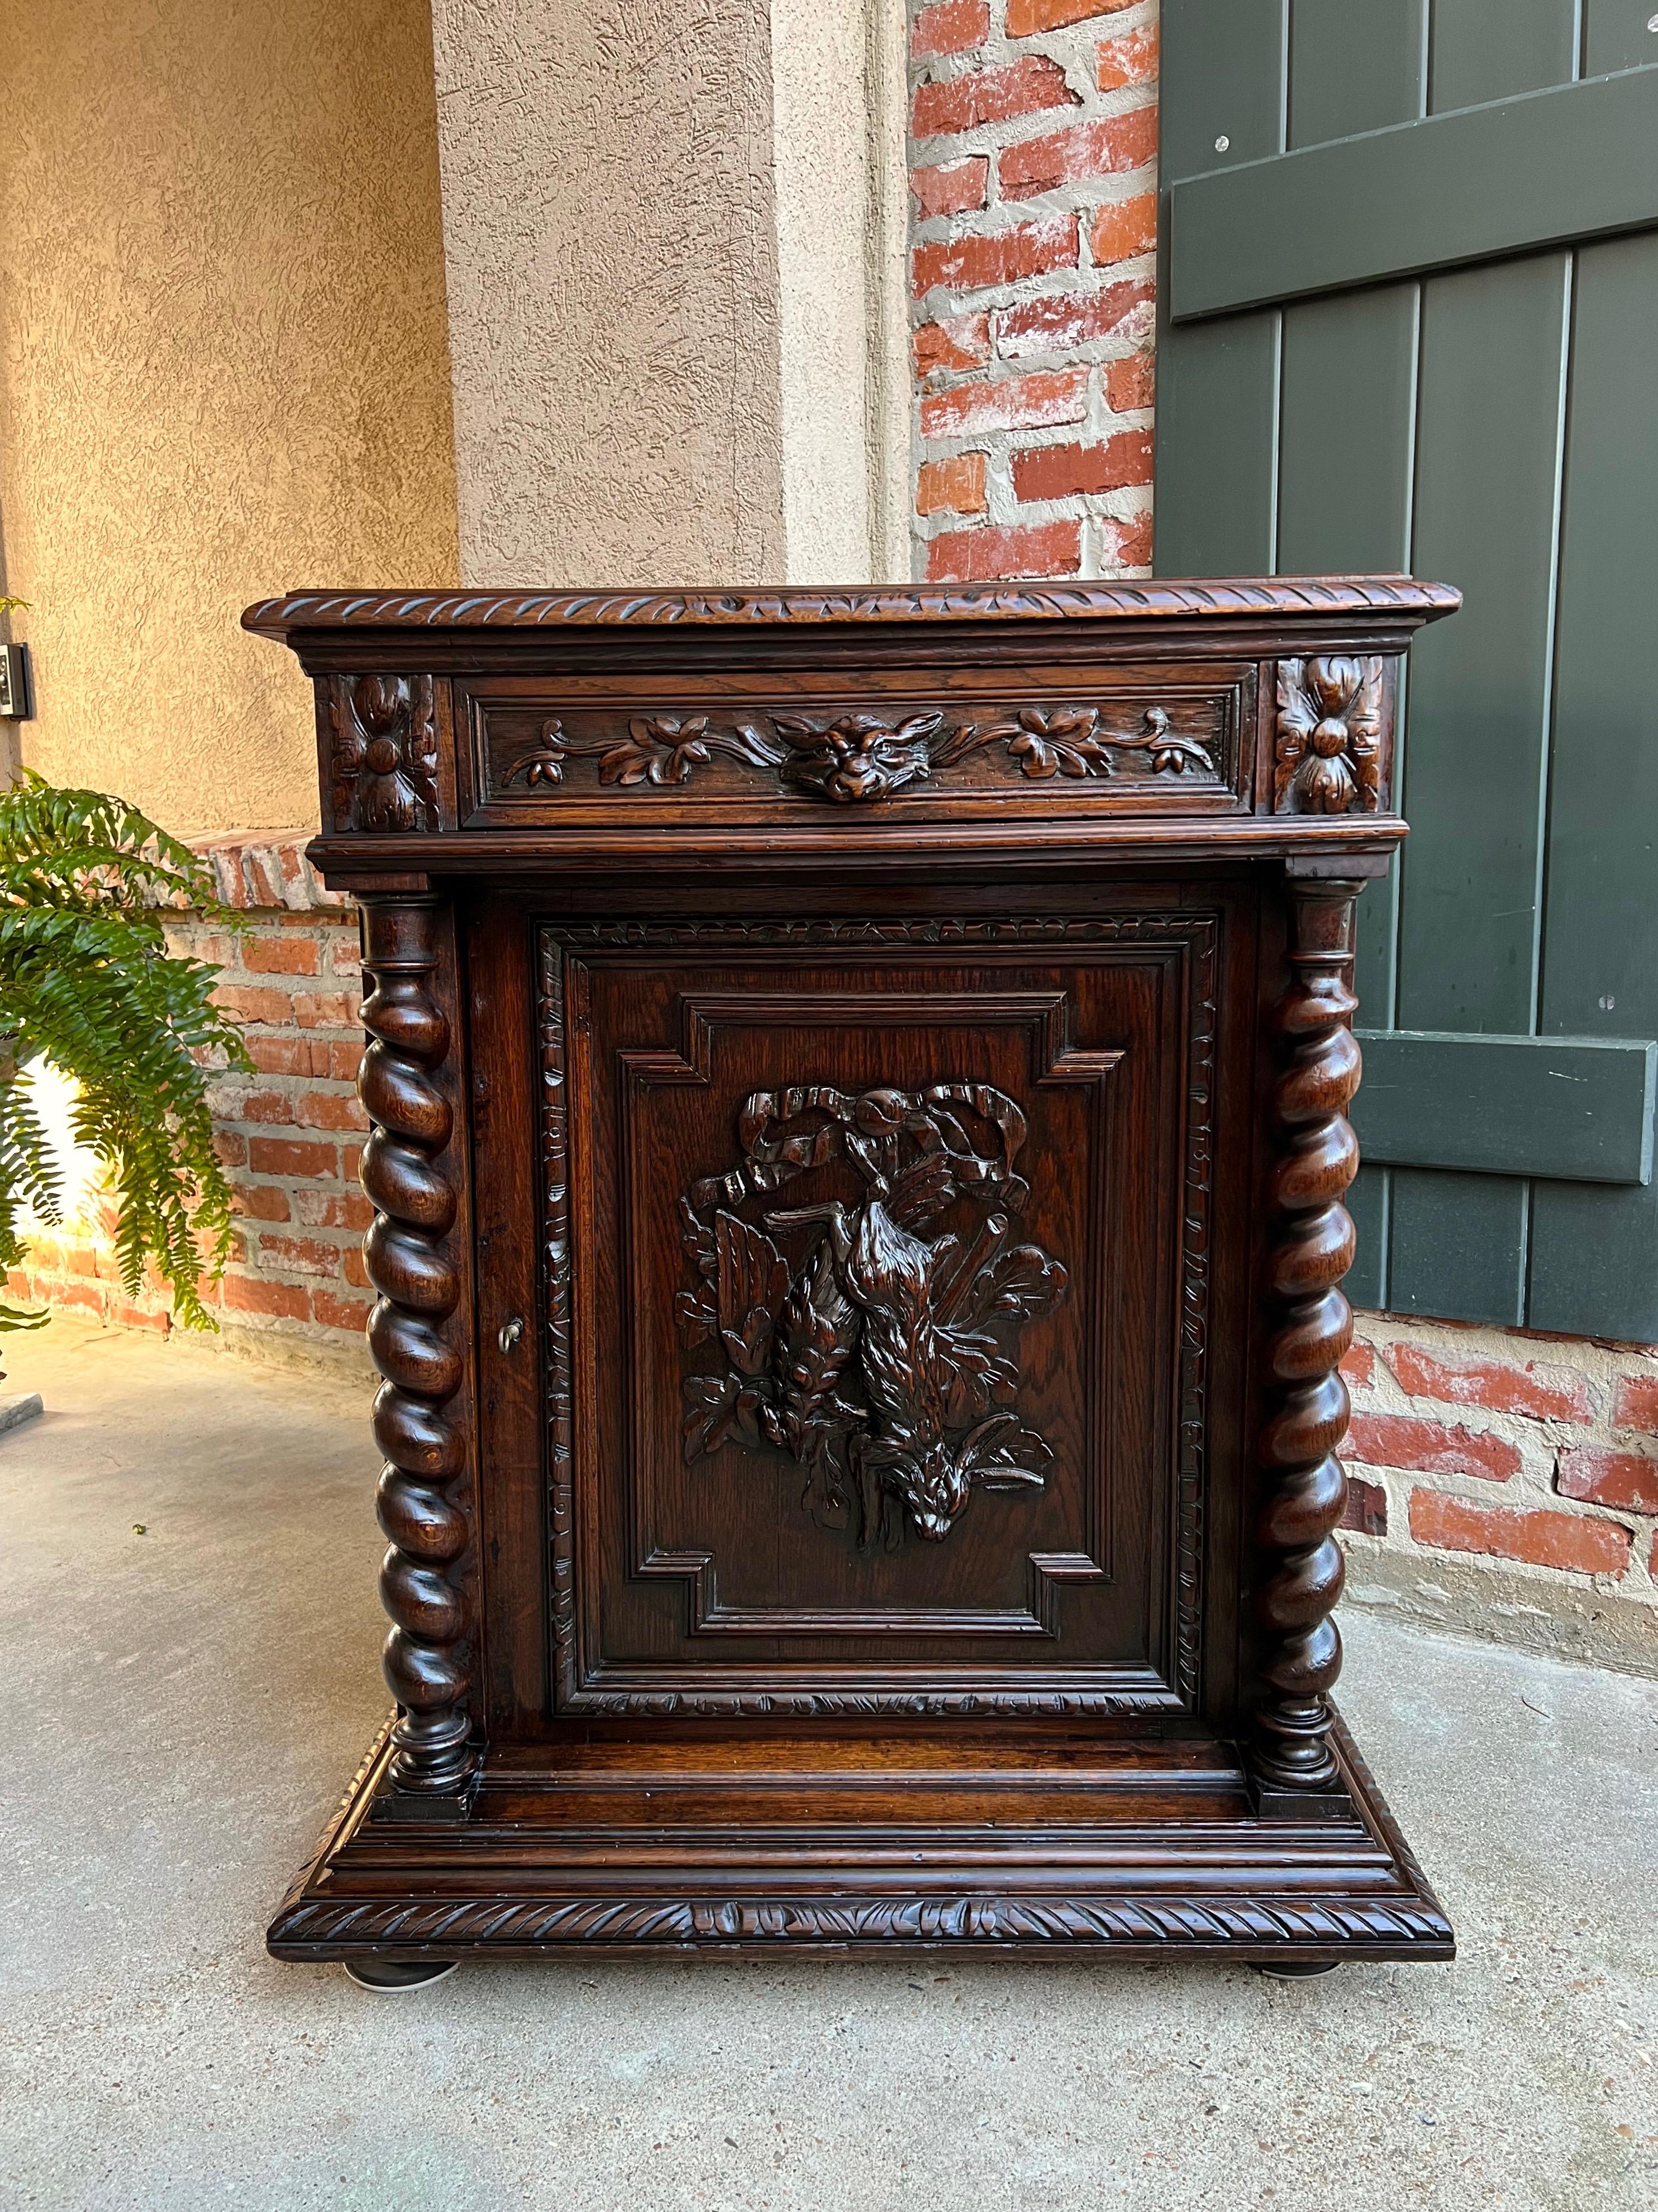 French Provincial 19th century French Carved Oak Hunt Cabinet Confiturier Barley Twist Rabbit